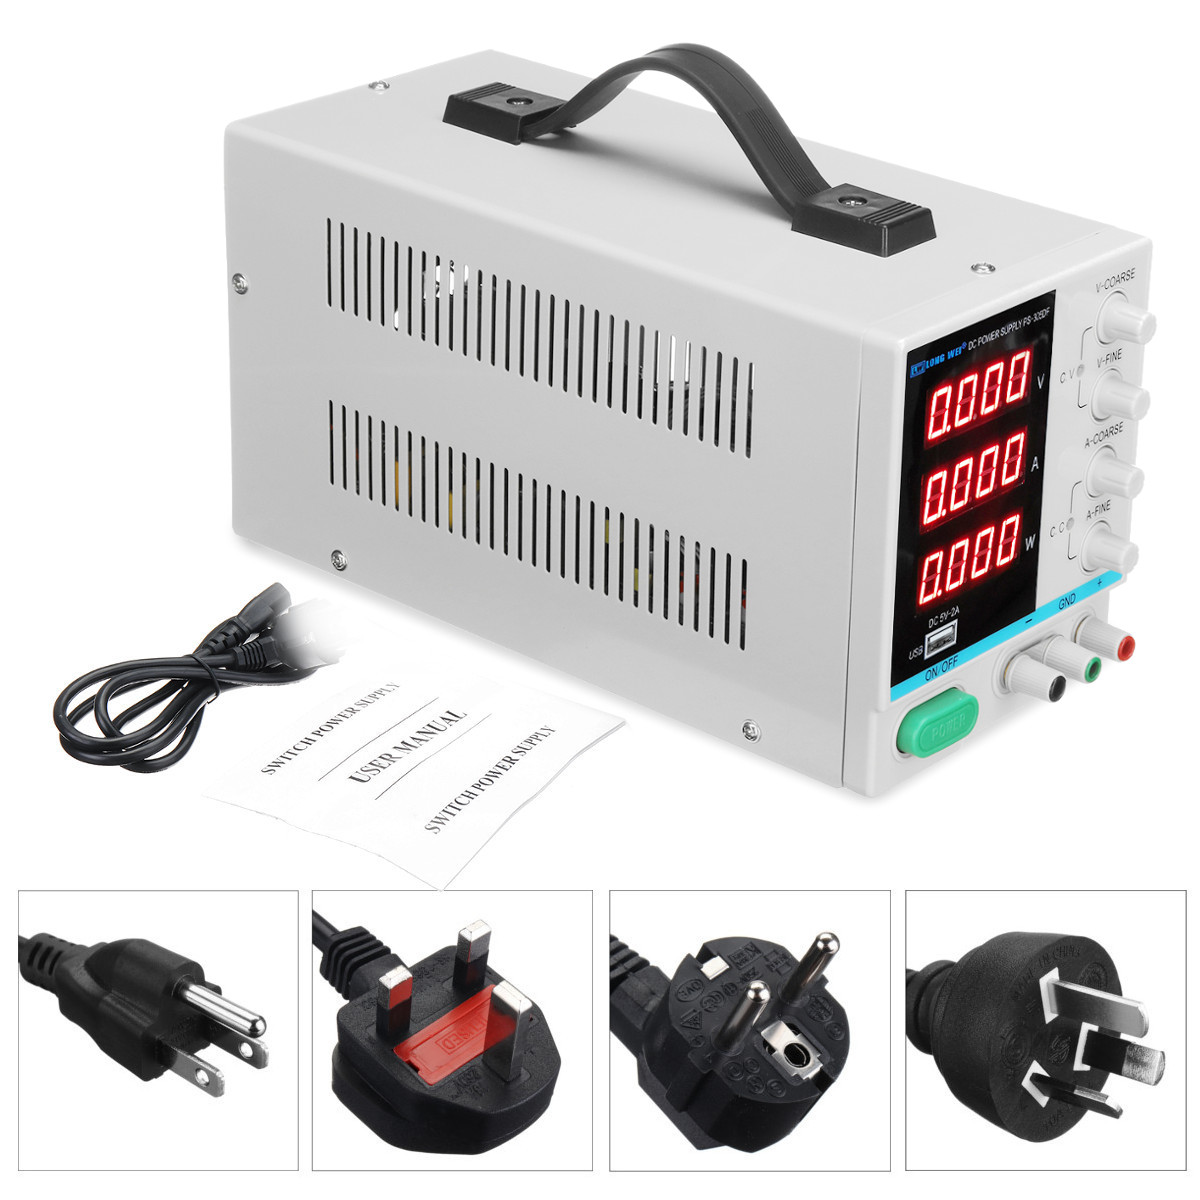 

LONG WEI PS-305DF 0.01 Accuracy 110V/220V 30V 5A Adjustable DC Power Supply Switching Regulated Power Supply W/ 5V 2A USB